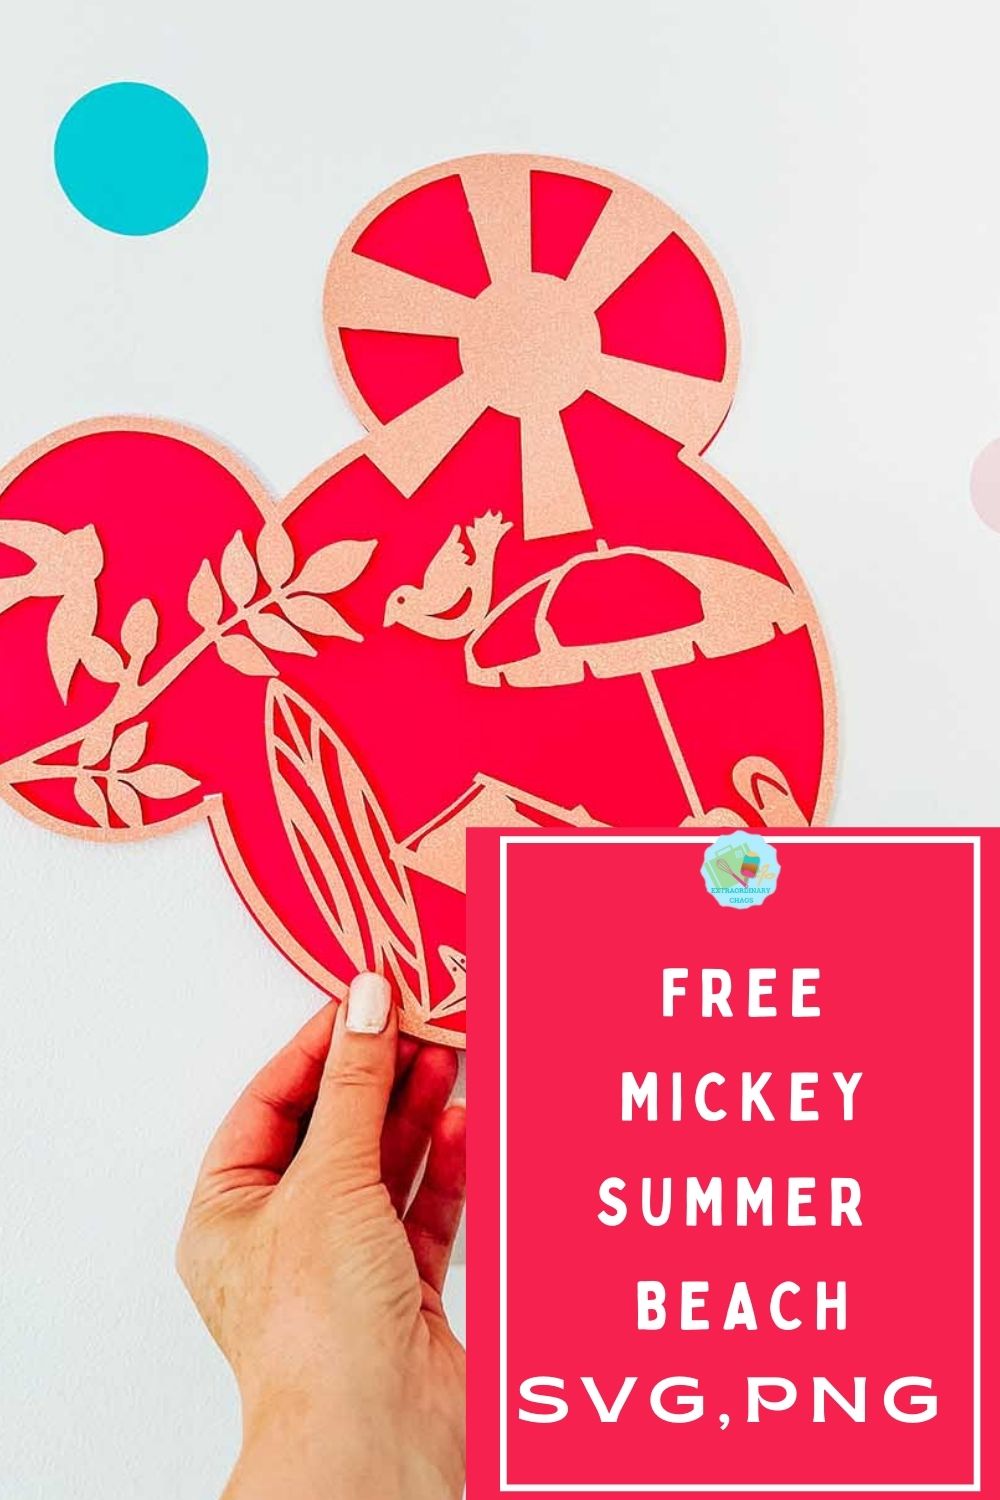 Free Mickey shaped summer beach SVG and PNG for scrapbooking